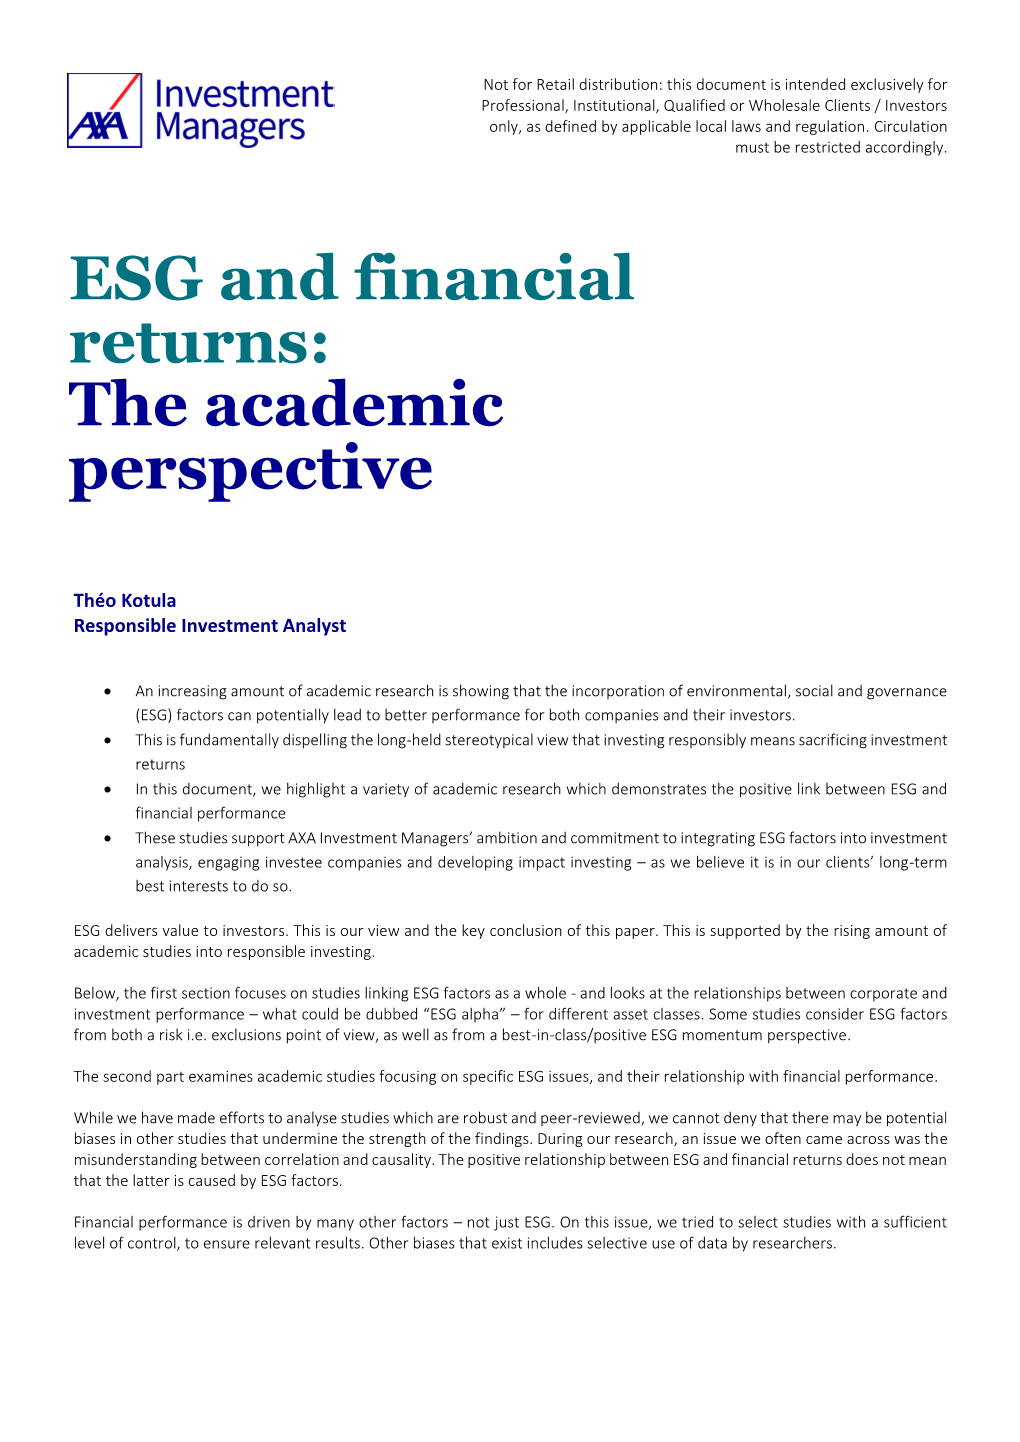 ESG and Financial Returns: the Academic Perspective